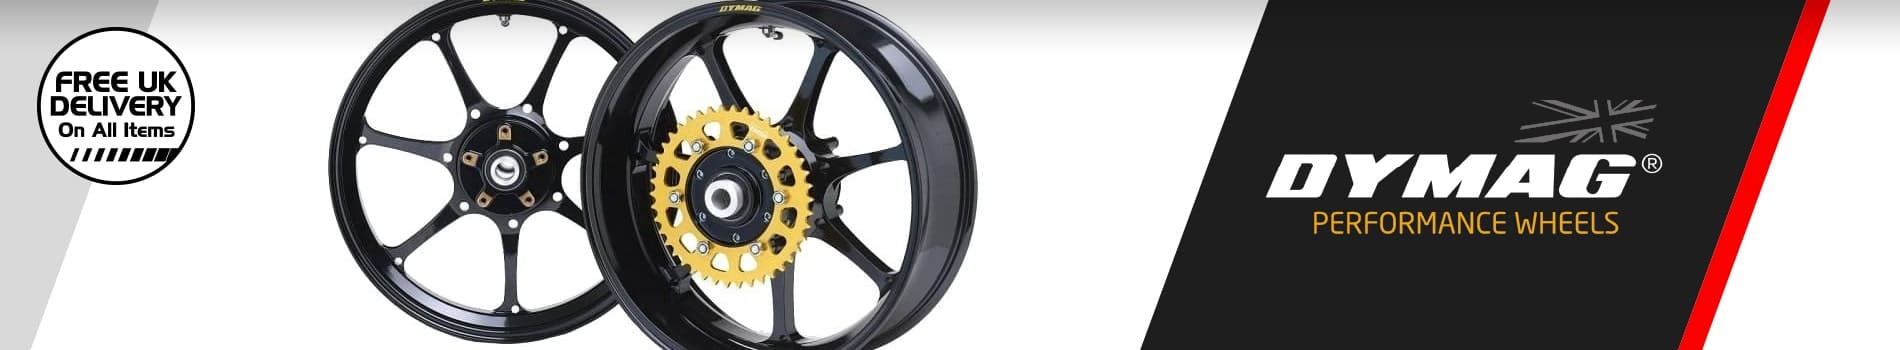 Wheels - Free UK Delivery